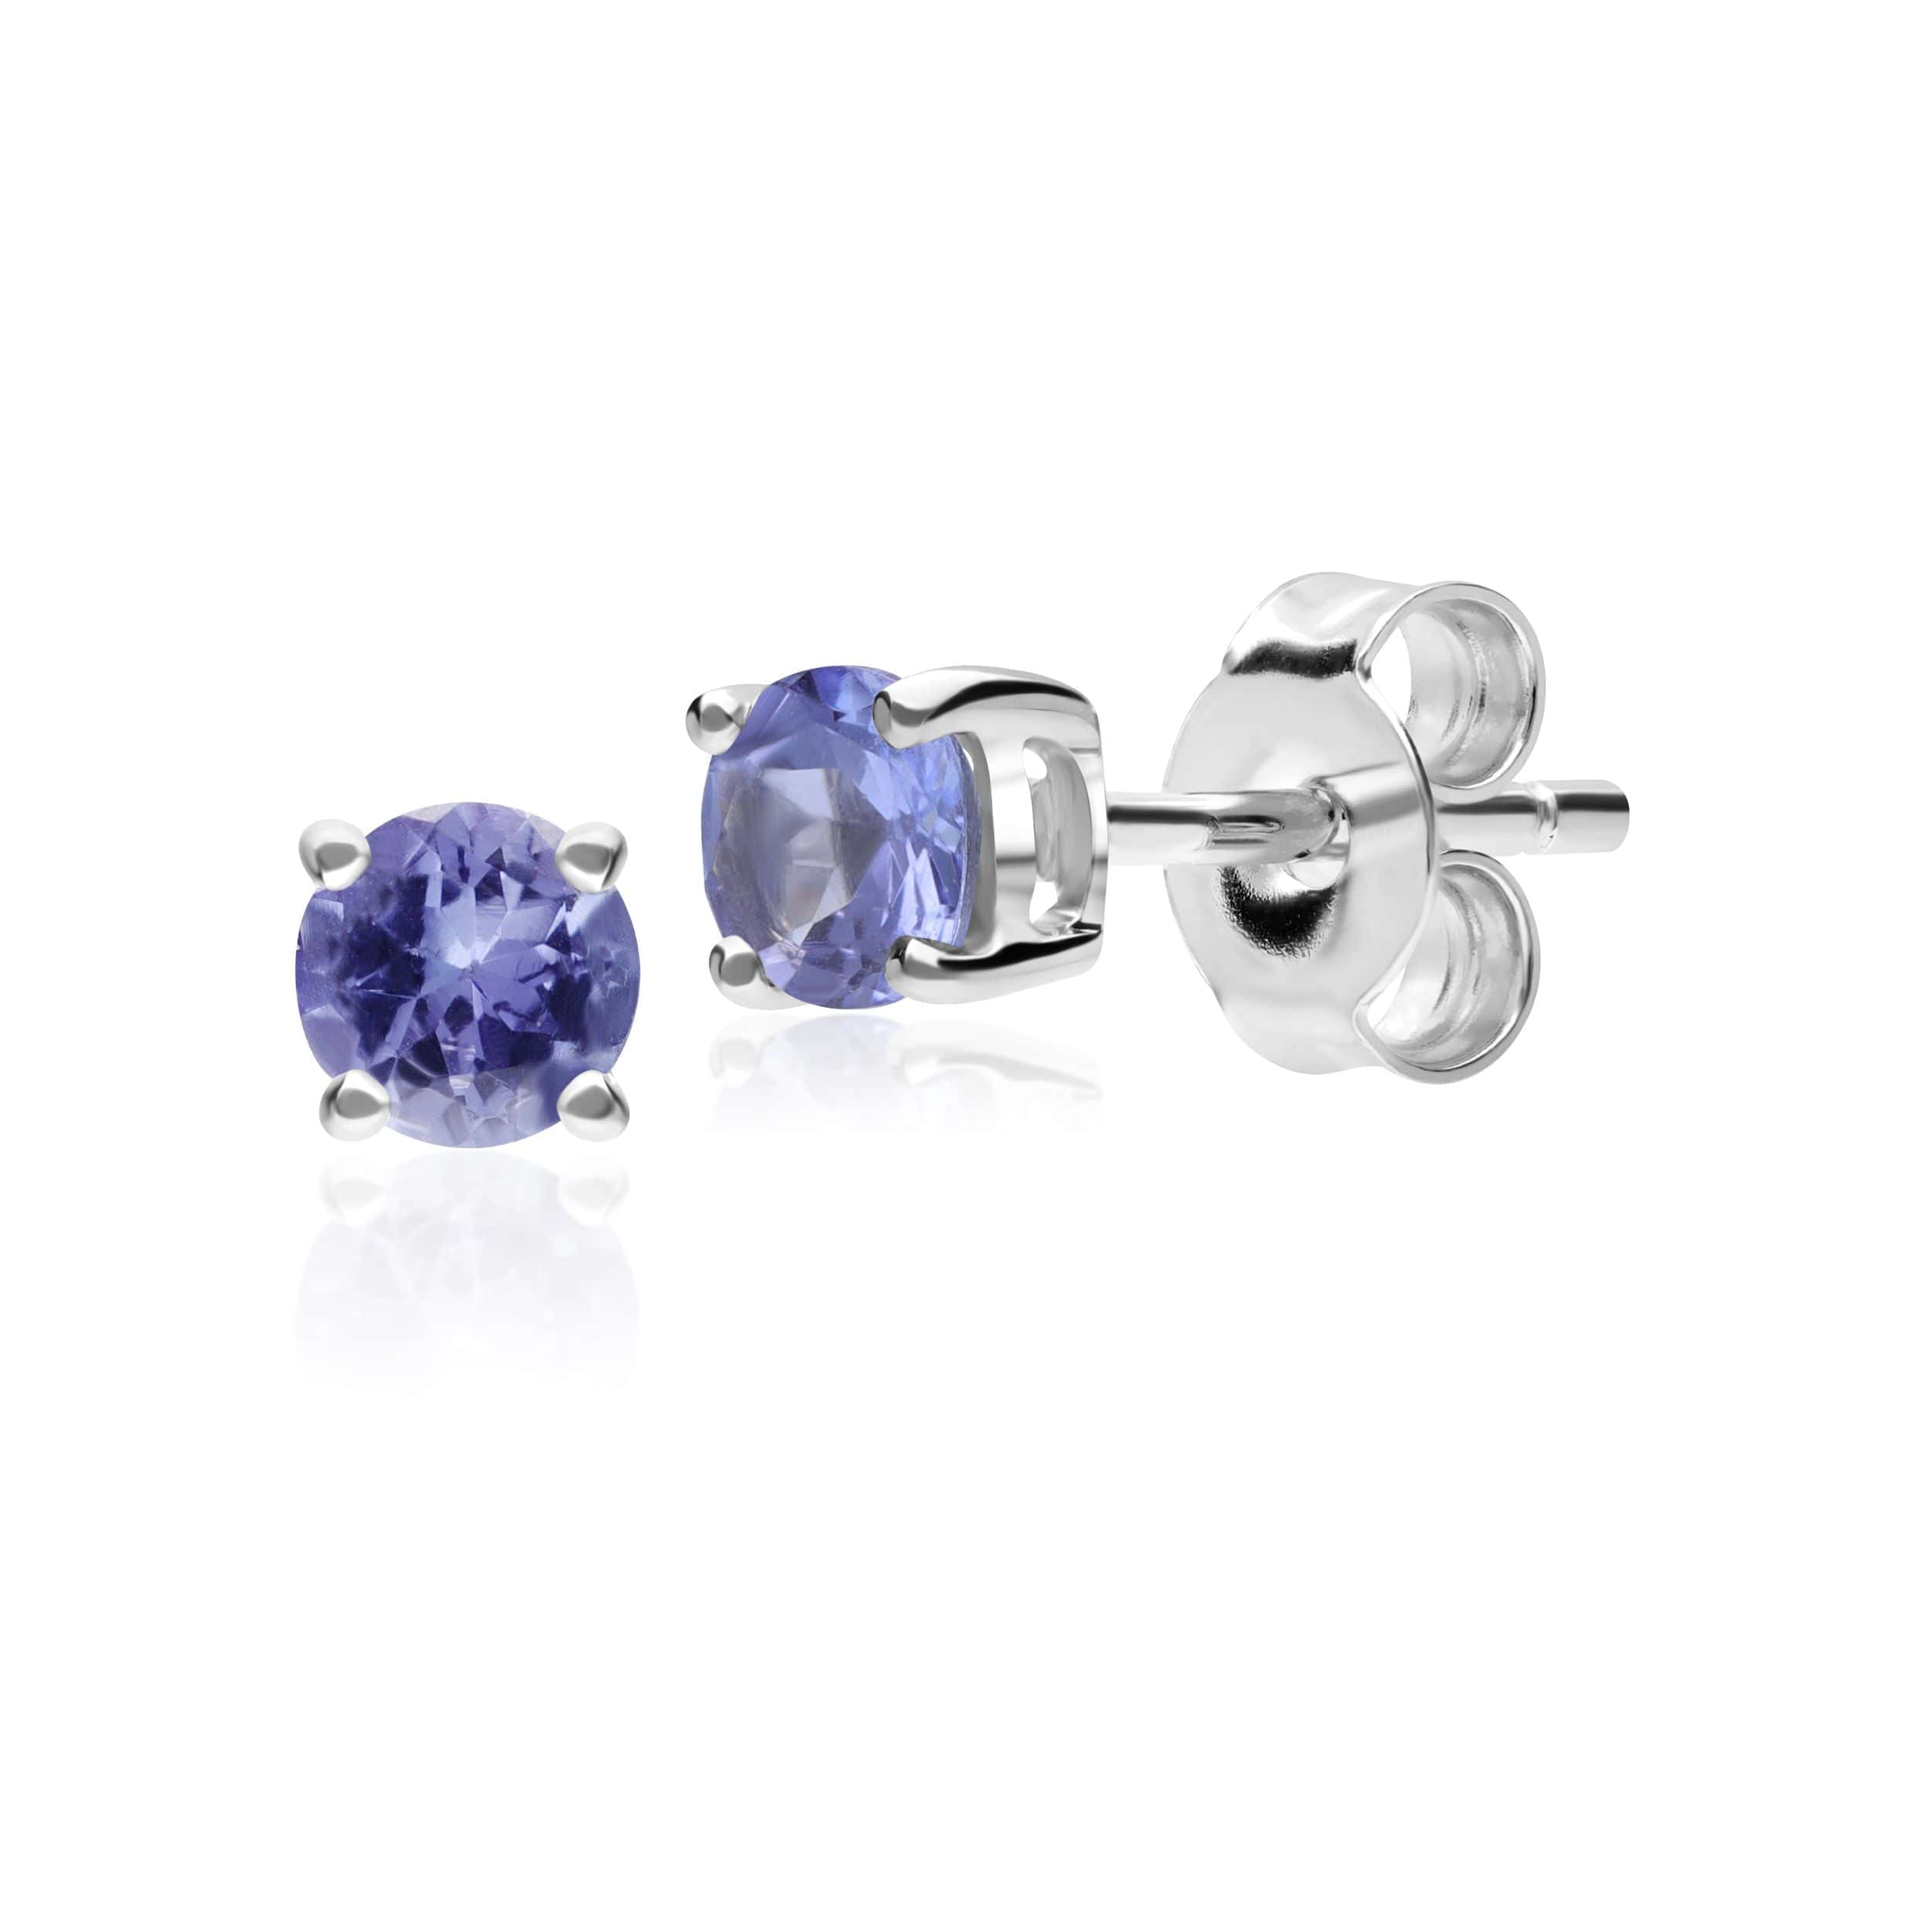 18937 Classic Round Tanzanite Stud Earrings in 9ct White Gold 1